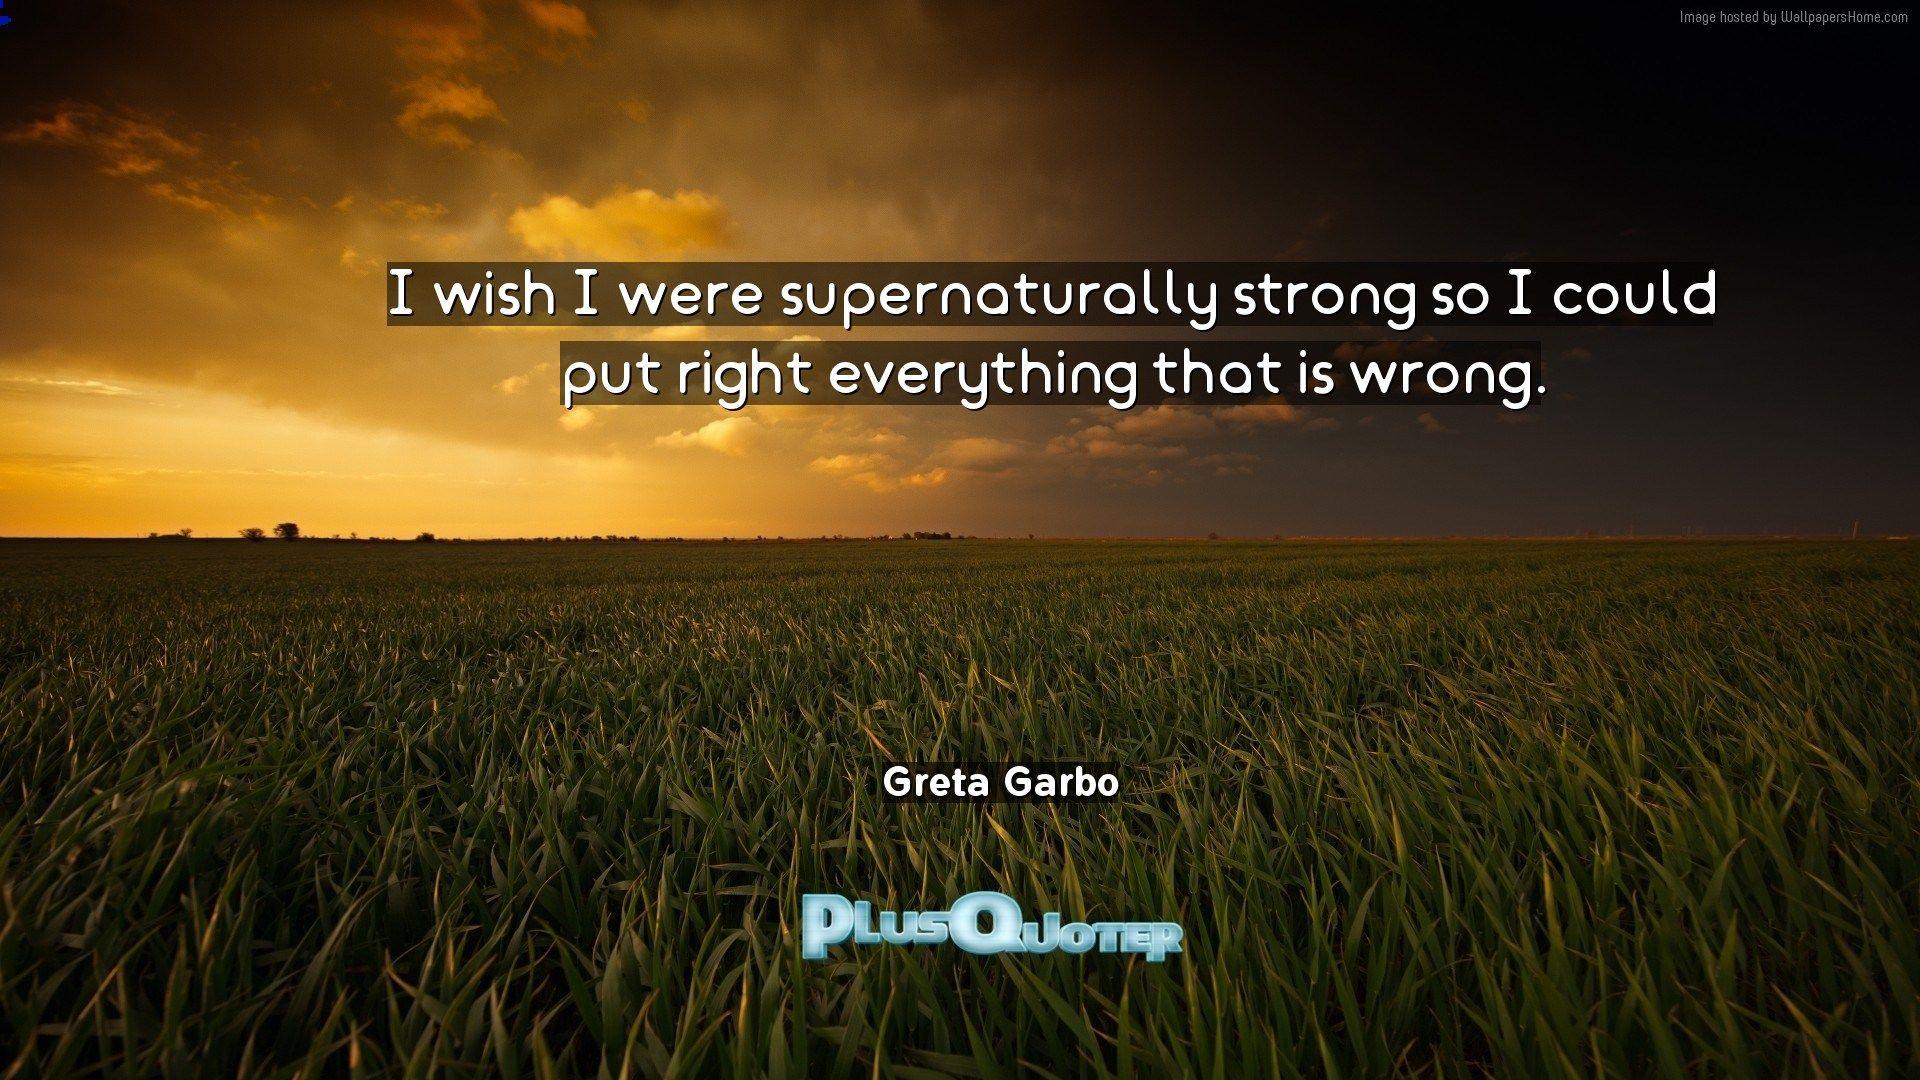 I wish I were supernaturally strong so I could put right